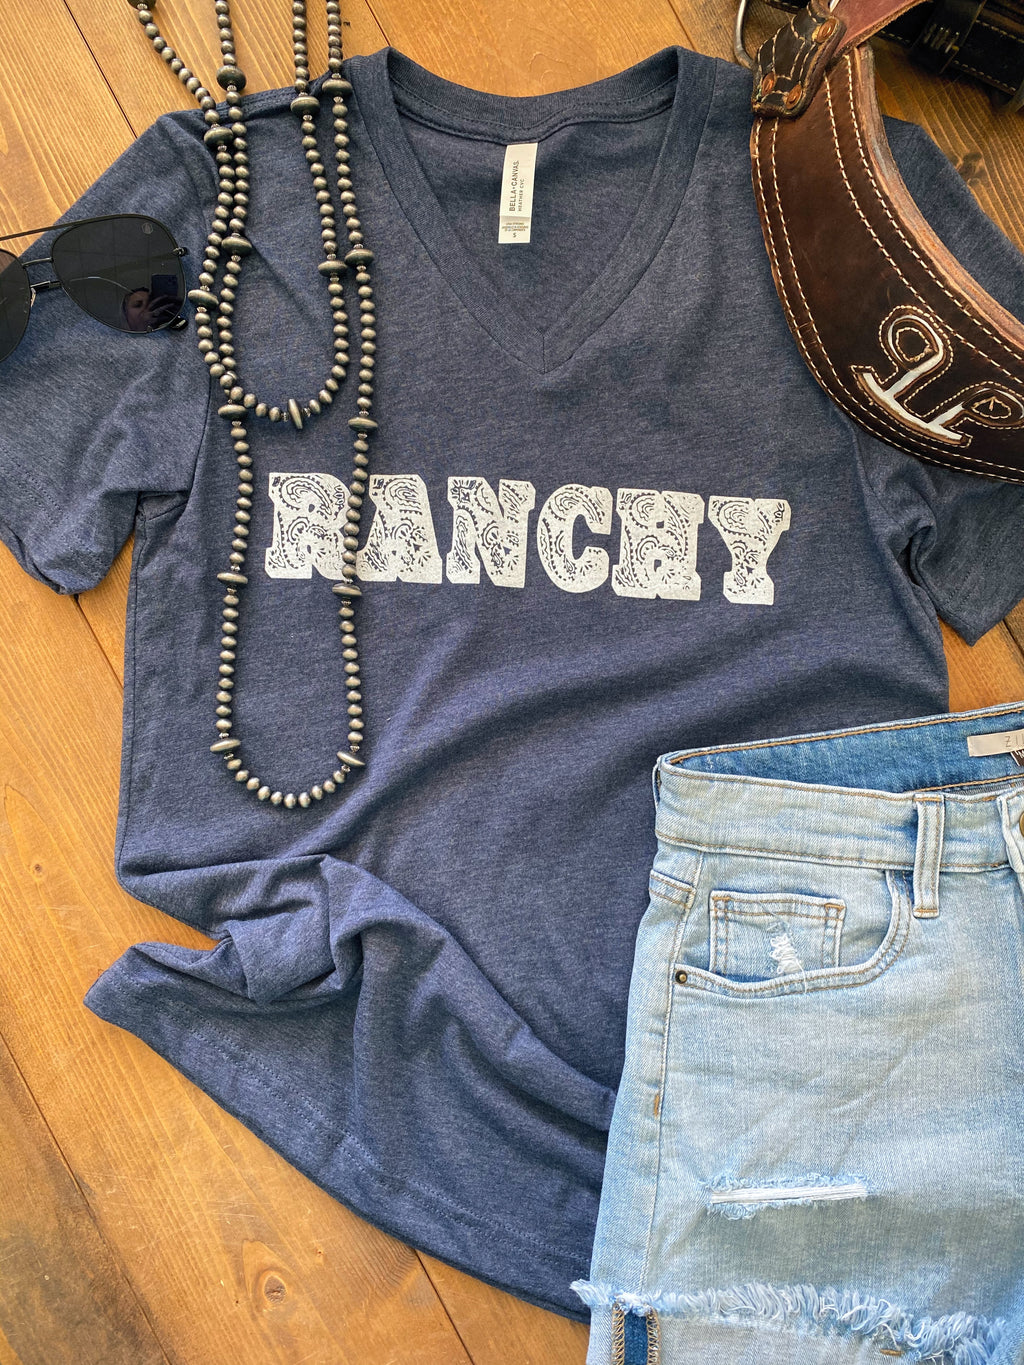 Ranchy Graphic Tee - Pistols and Petticoats